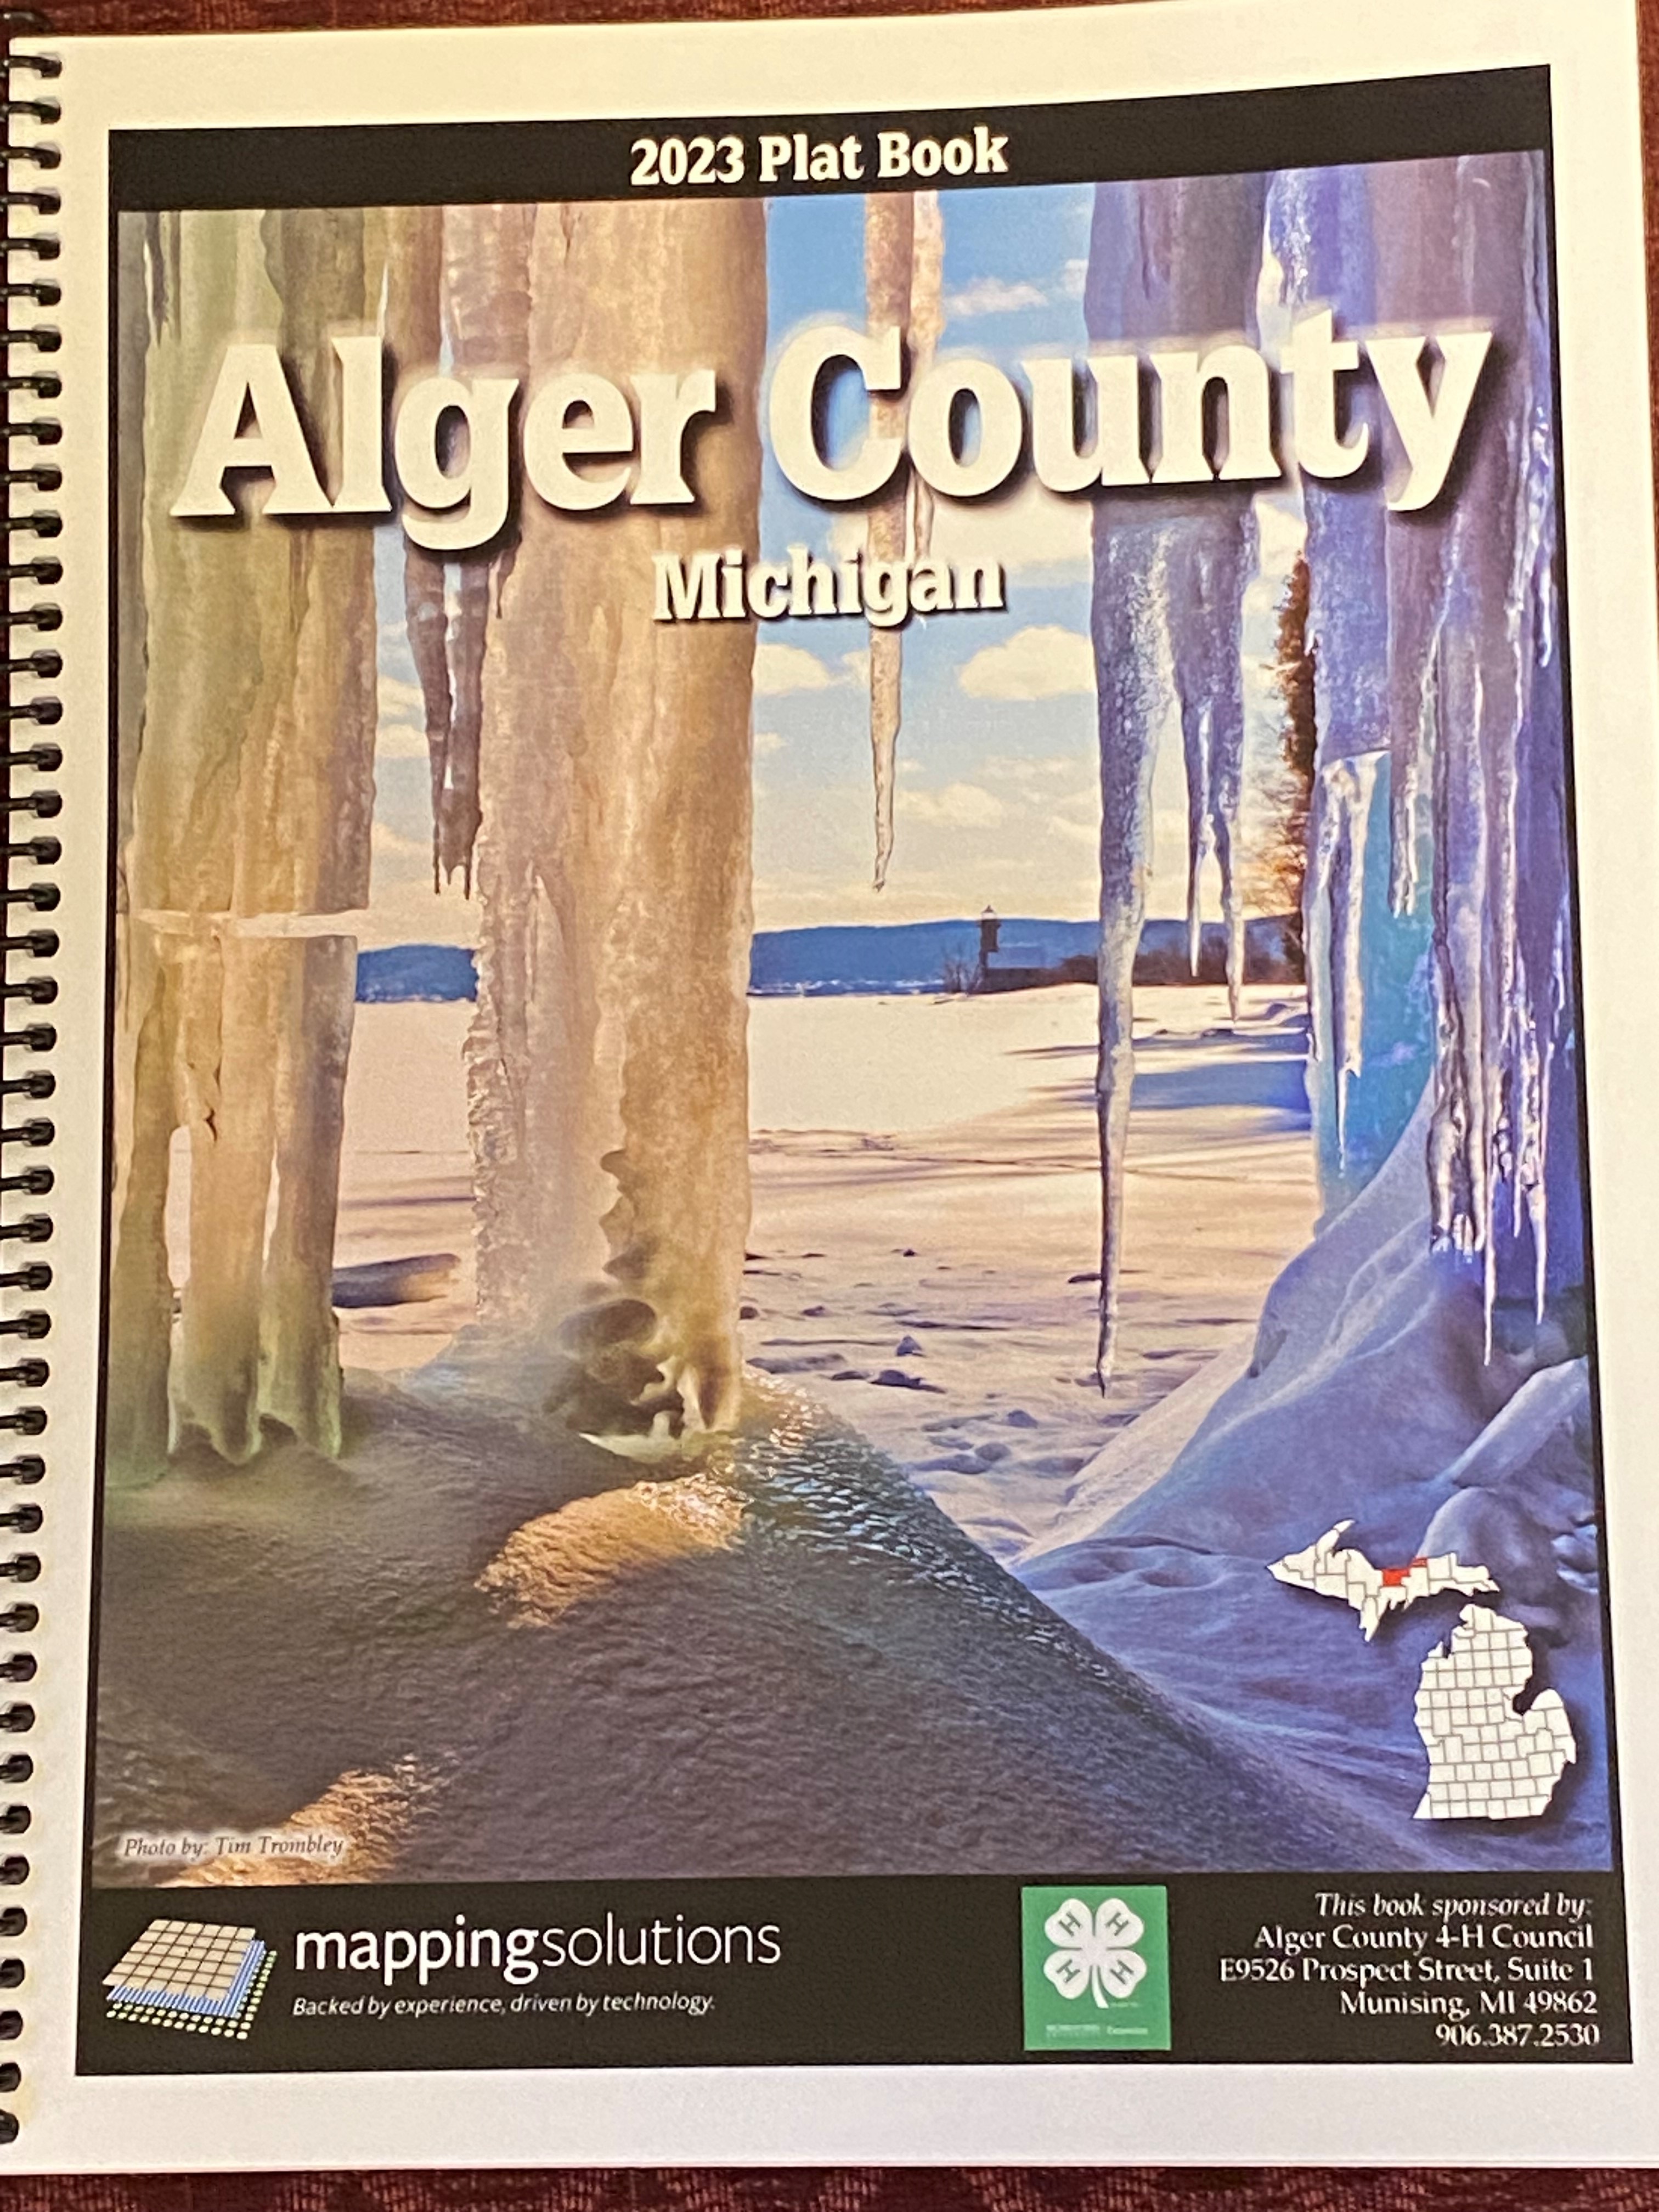 2023 Alger County Plat Book Cover